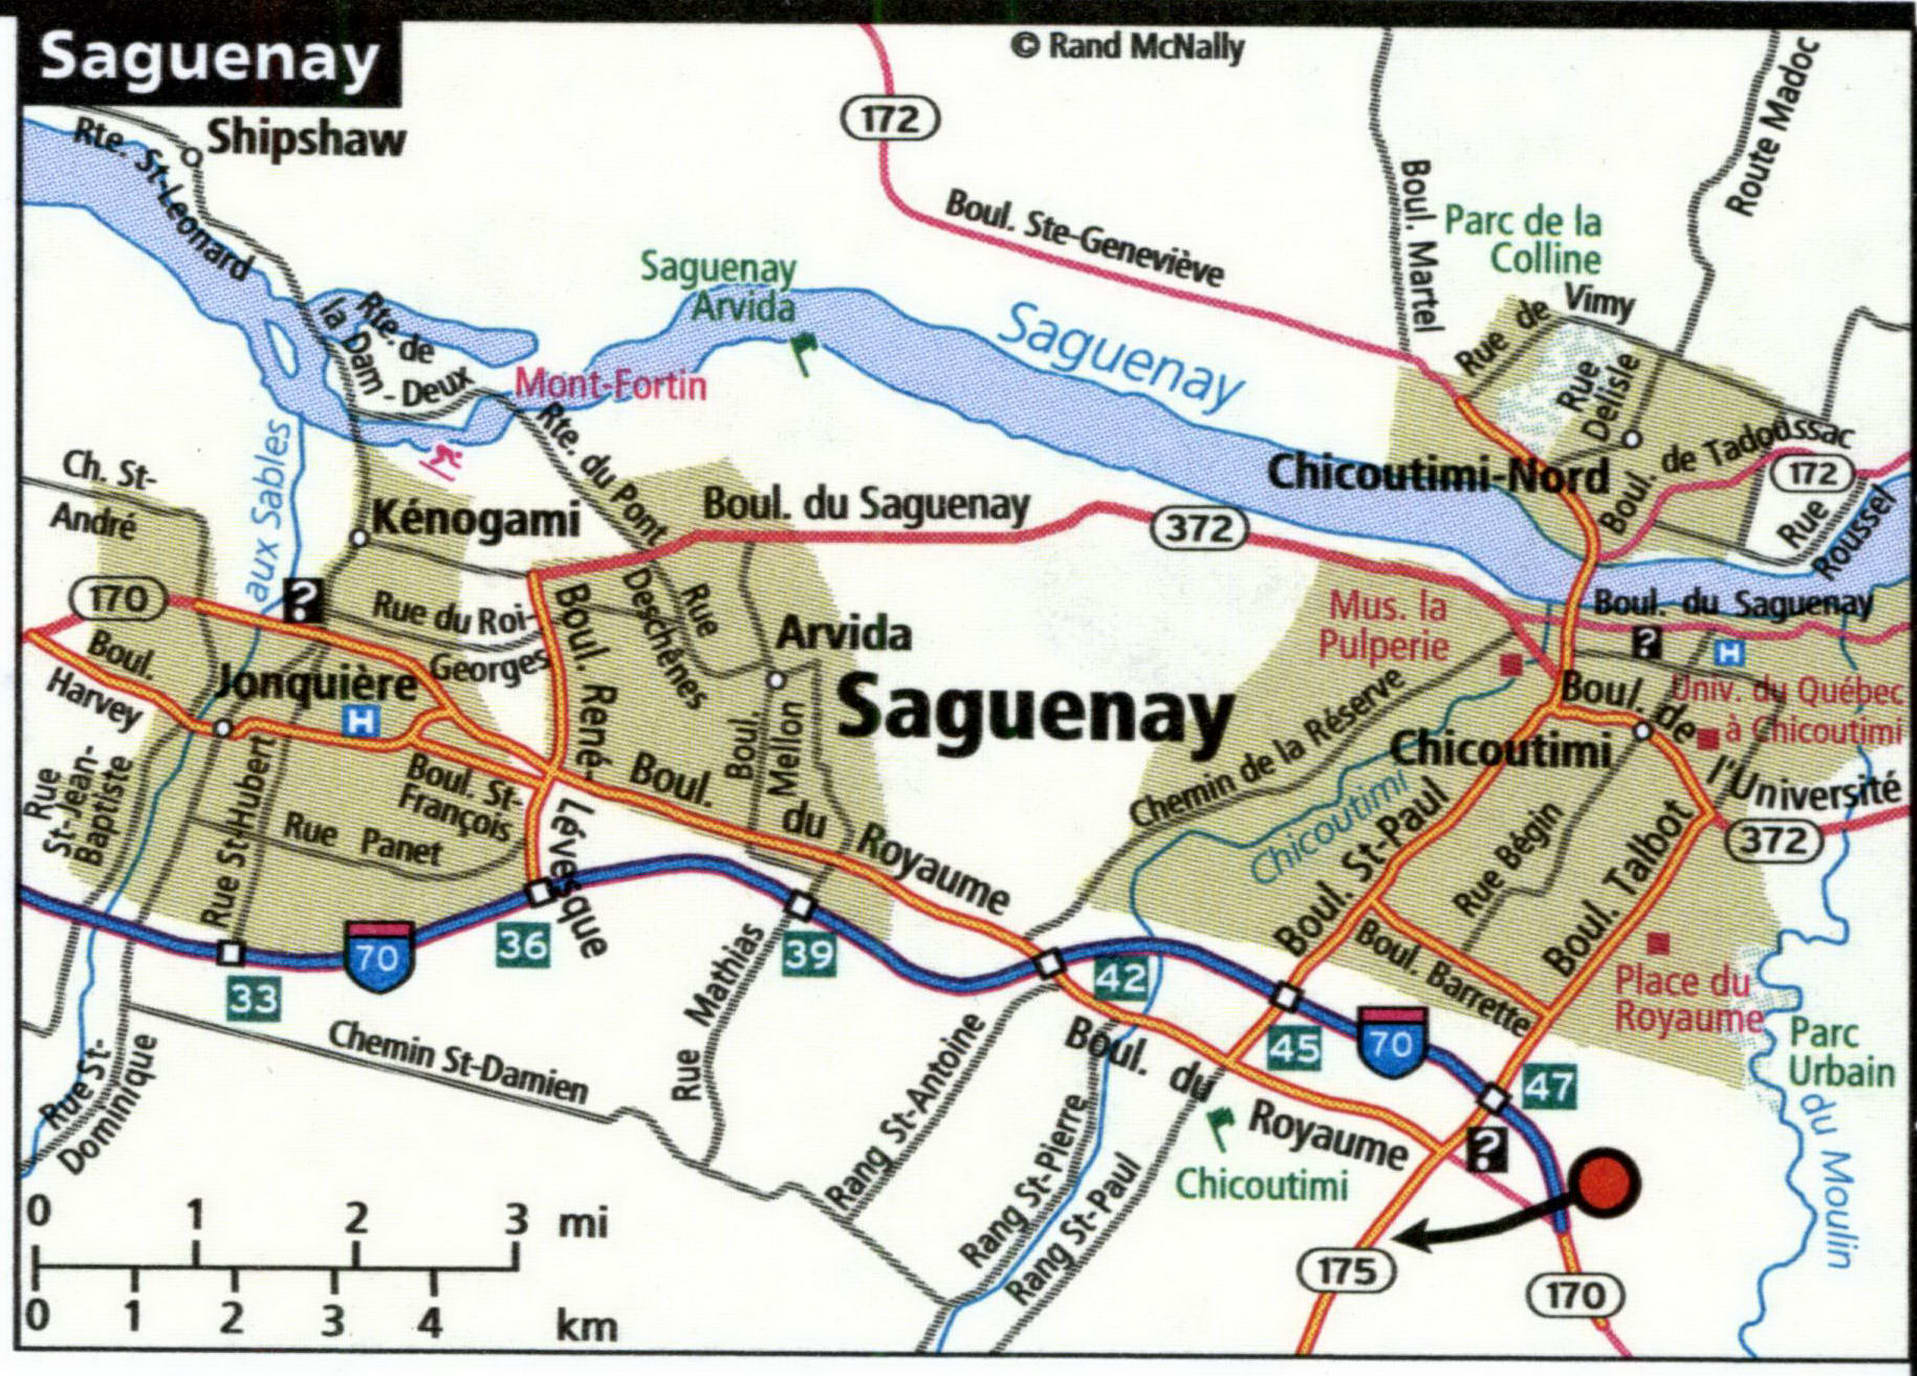 Saguenay city map for truckers